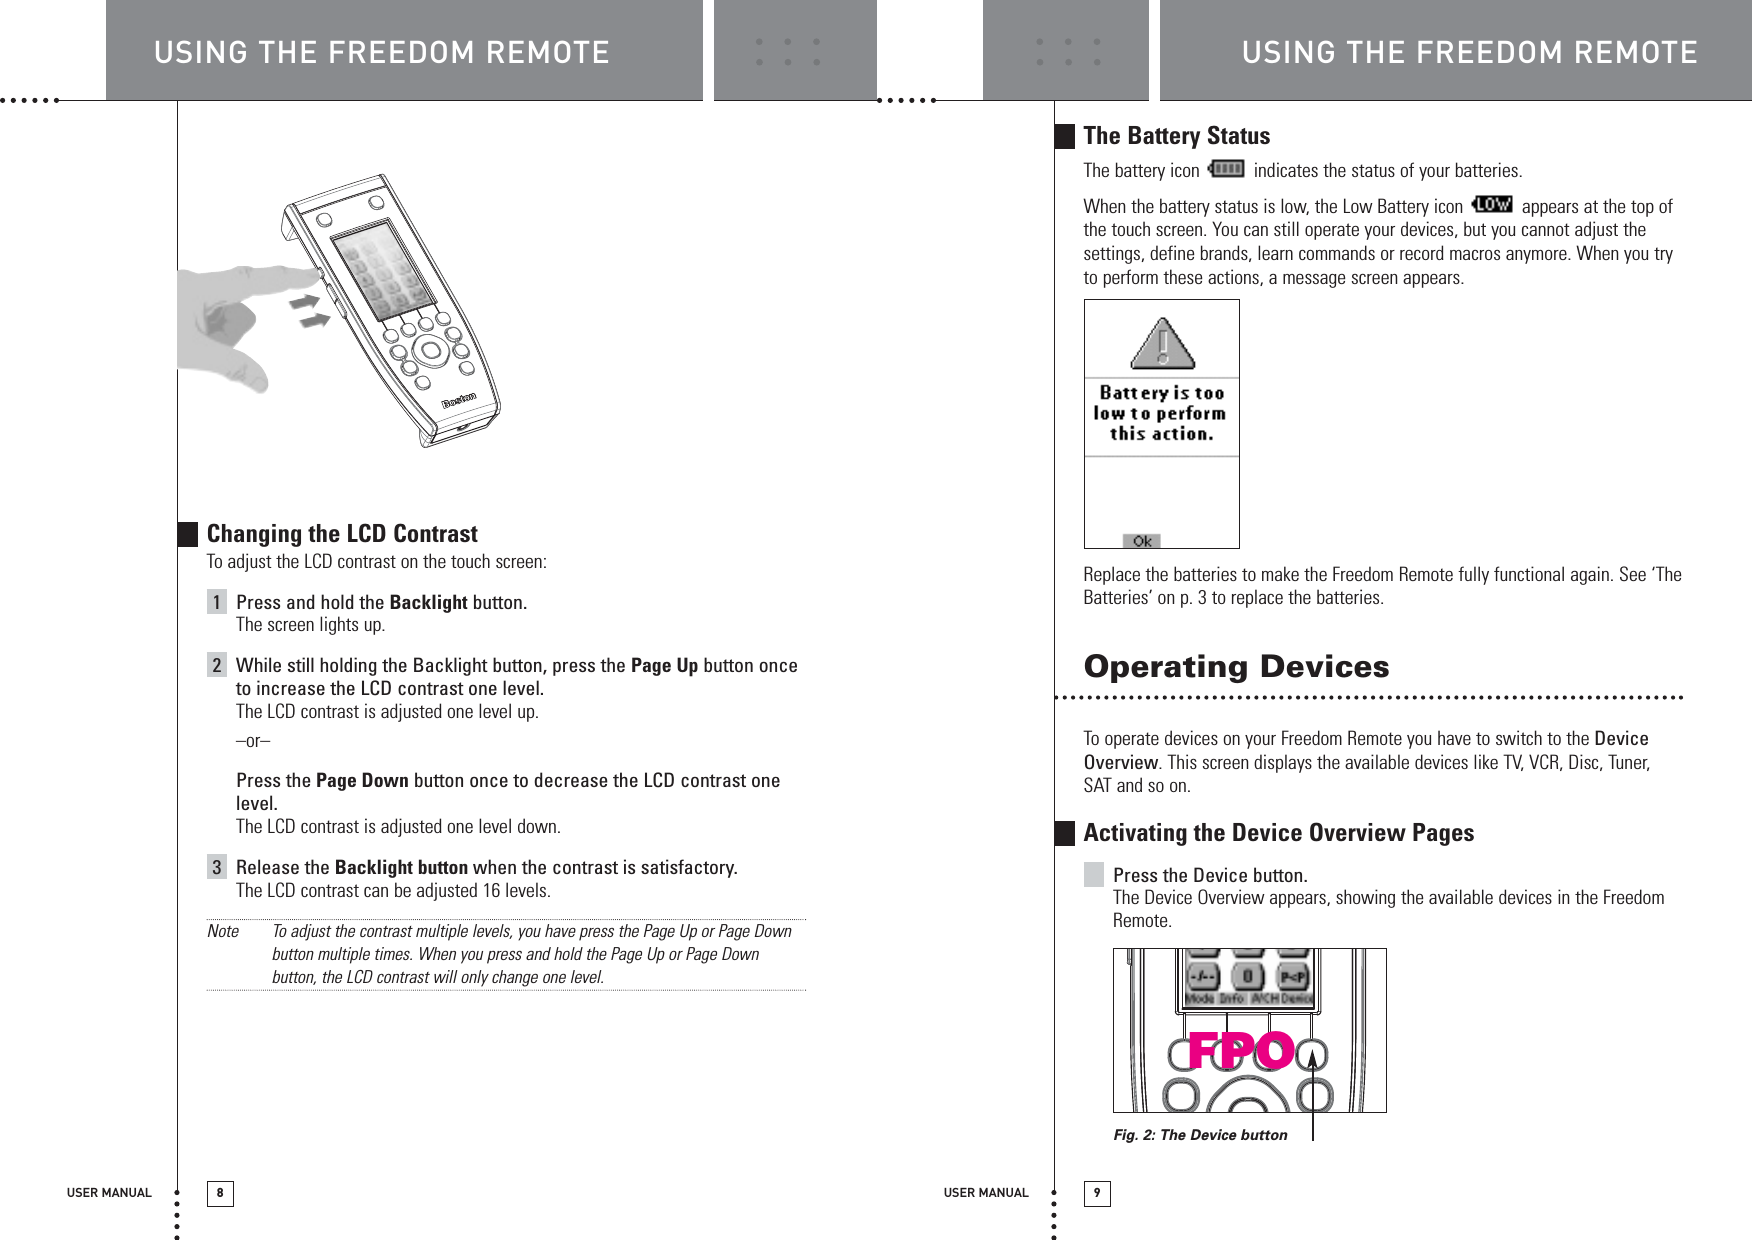 USING THE FREEDOM REMOTE USING THE FREEDOM REMOTEUSER MANUAL 8USER MANUAL 9Changing the LCD ContrastTo adjust the LCD contrast on the touch screen:1Press and hold the Backlight button.The screen lights up.2While still holding the Backlight button, press the Page Up button onceto increase the LCD contrast one level.The LCD contrast is adjusted one level up.–or–Press the Page Down button once to decrease the LCD contrast onelevel.The LCD contrast is adjusted one level down.3Release the Backlight button when the contrast is satisfactory.The LCD contrast can be adjusted 16 levels.Note To adjust the contrast multiple levels, you have press the Page Up or Page Downbutton multiple times. When you press and hold the Page Up or Page Downbutton, the LCD contrast will only change one level.The Battery StatusThe battery icon  indicates the status of your batteries.When the battery status is low, the Low Battery icon  appears at the top ofthe touch screen. You can still operate your devices, but you cannot adjust thesettings, define brands, learn commands or record macros anymore. When you tryto perform these actions, a message screen appears.Replace the batteries to make the Freedom Remote fully functional again. See ‘TheBatteries’ on p. 3 to replace the batteries.Operating DevicesTo operate devices on your Freedom Remote you have to switch to the DeviceOverview. This screen displays the available devices like TV, VCR, Disc, Tuner,SAT and so on.Activating the Device Overview PagesPress the Device button.The Device Overview appears, showing the available devices in the FreedomRemote.Fig. 2: The Device buttonFPO